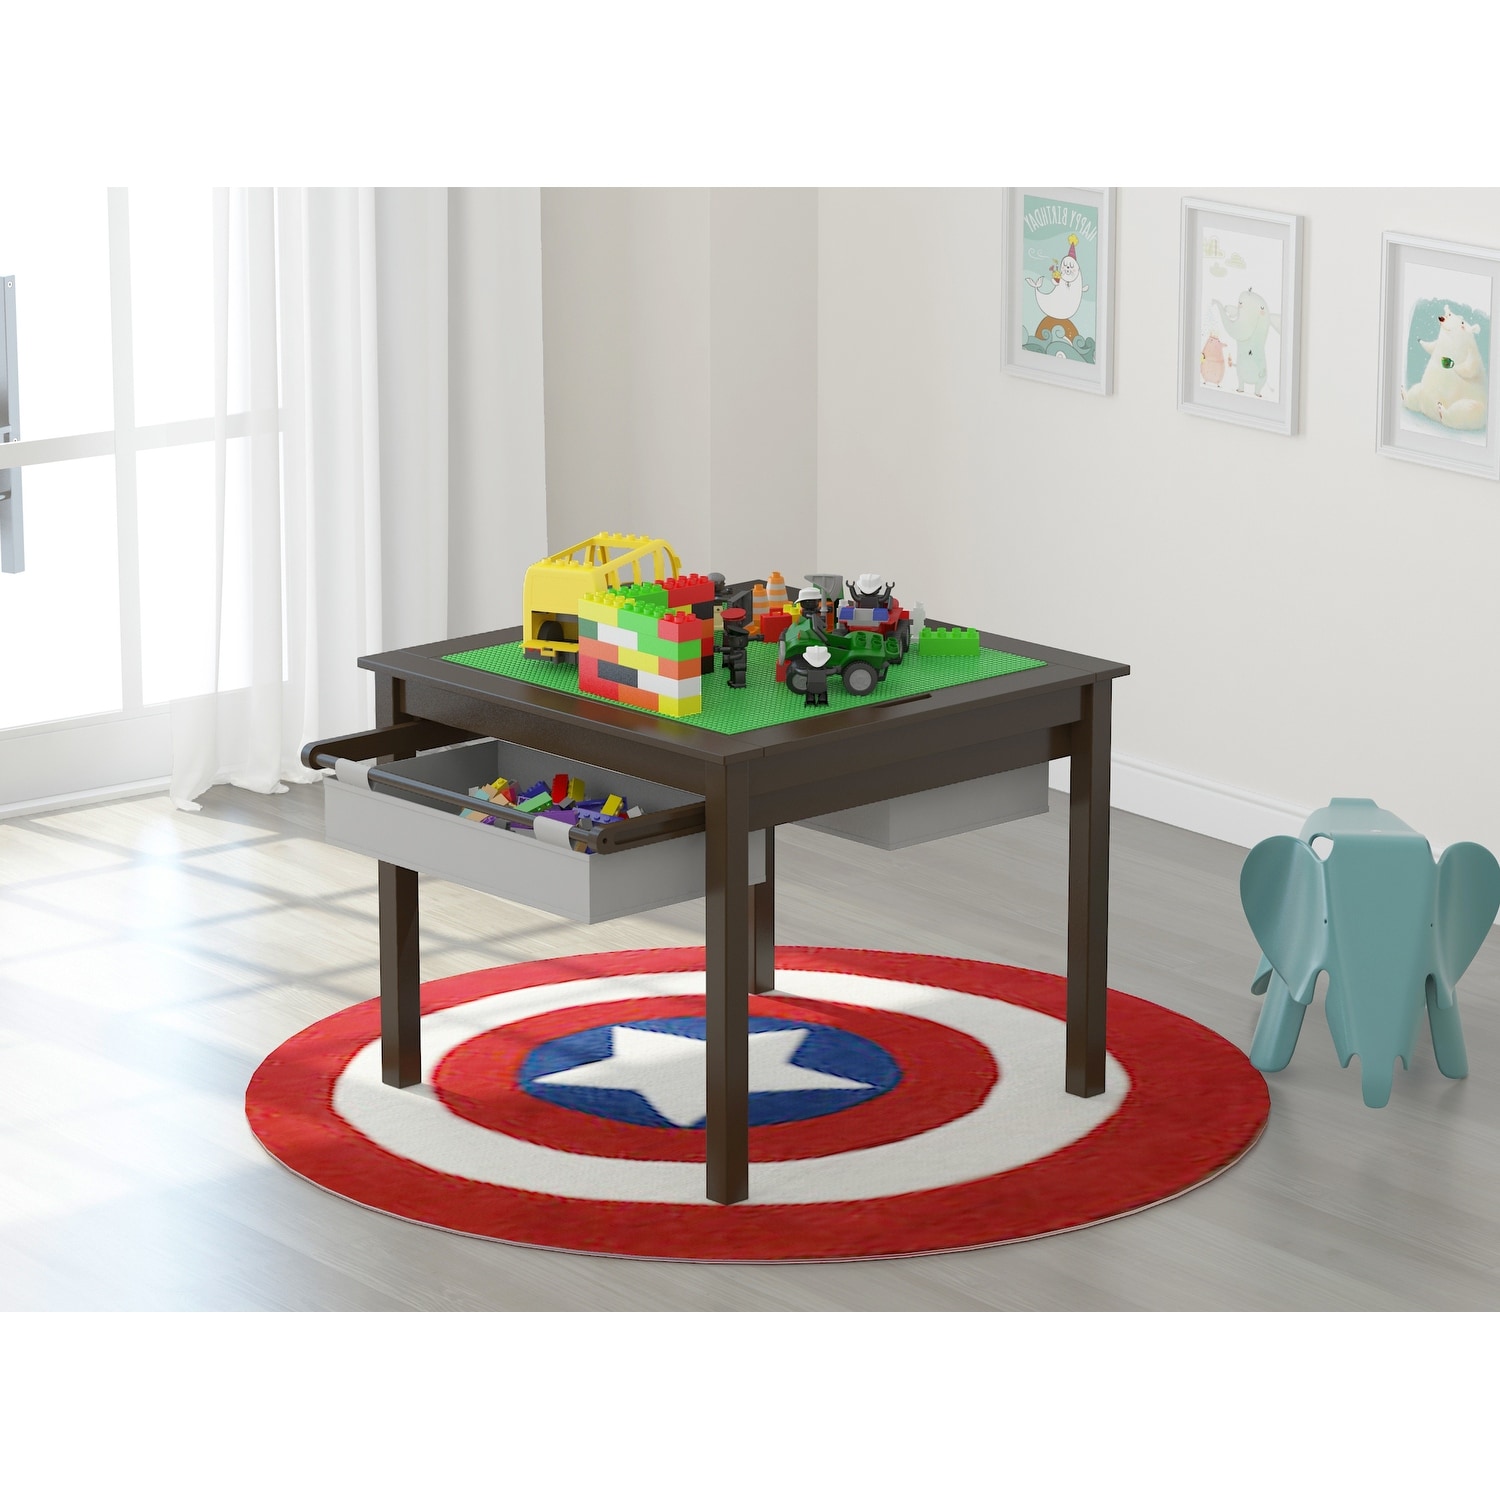 UTEX-2 in 1 Kids Activity Lego Table with Storage and Drawes - On Sale -  Bed Bath & Beyond - 32622702